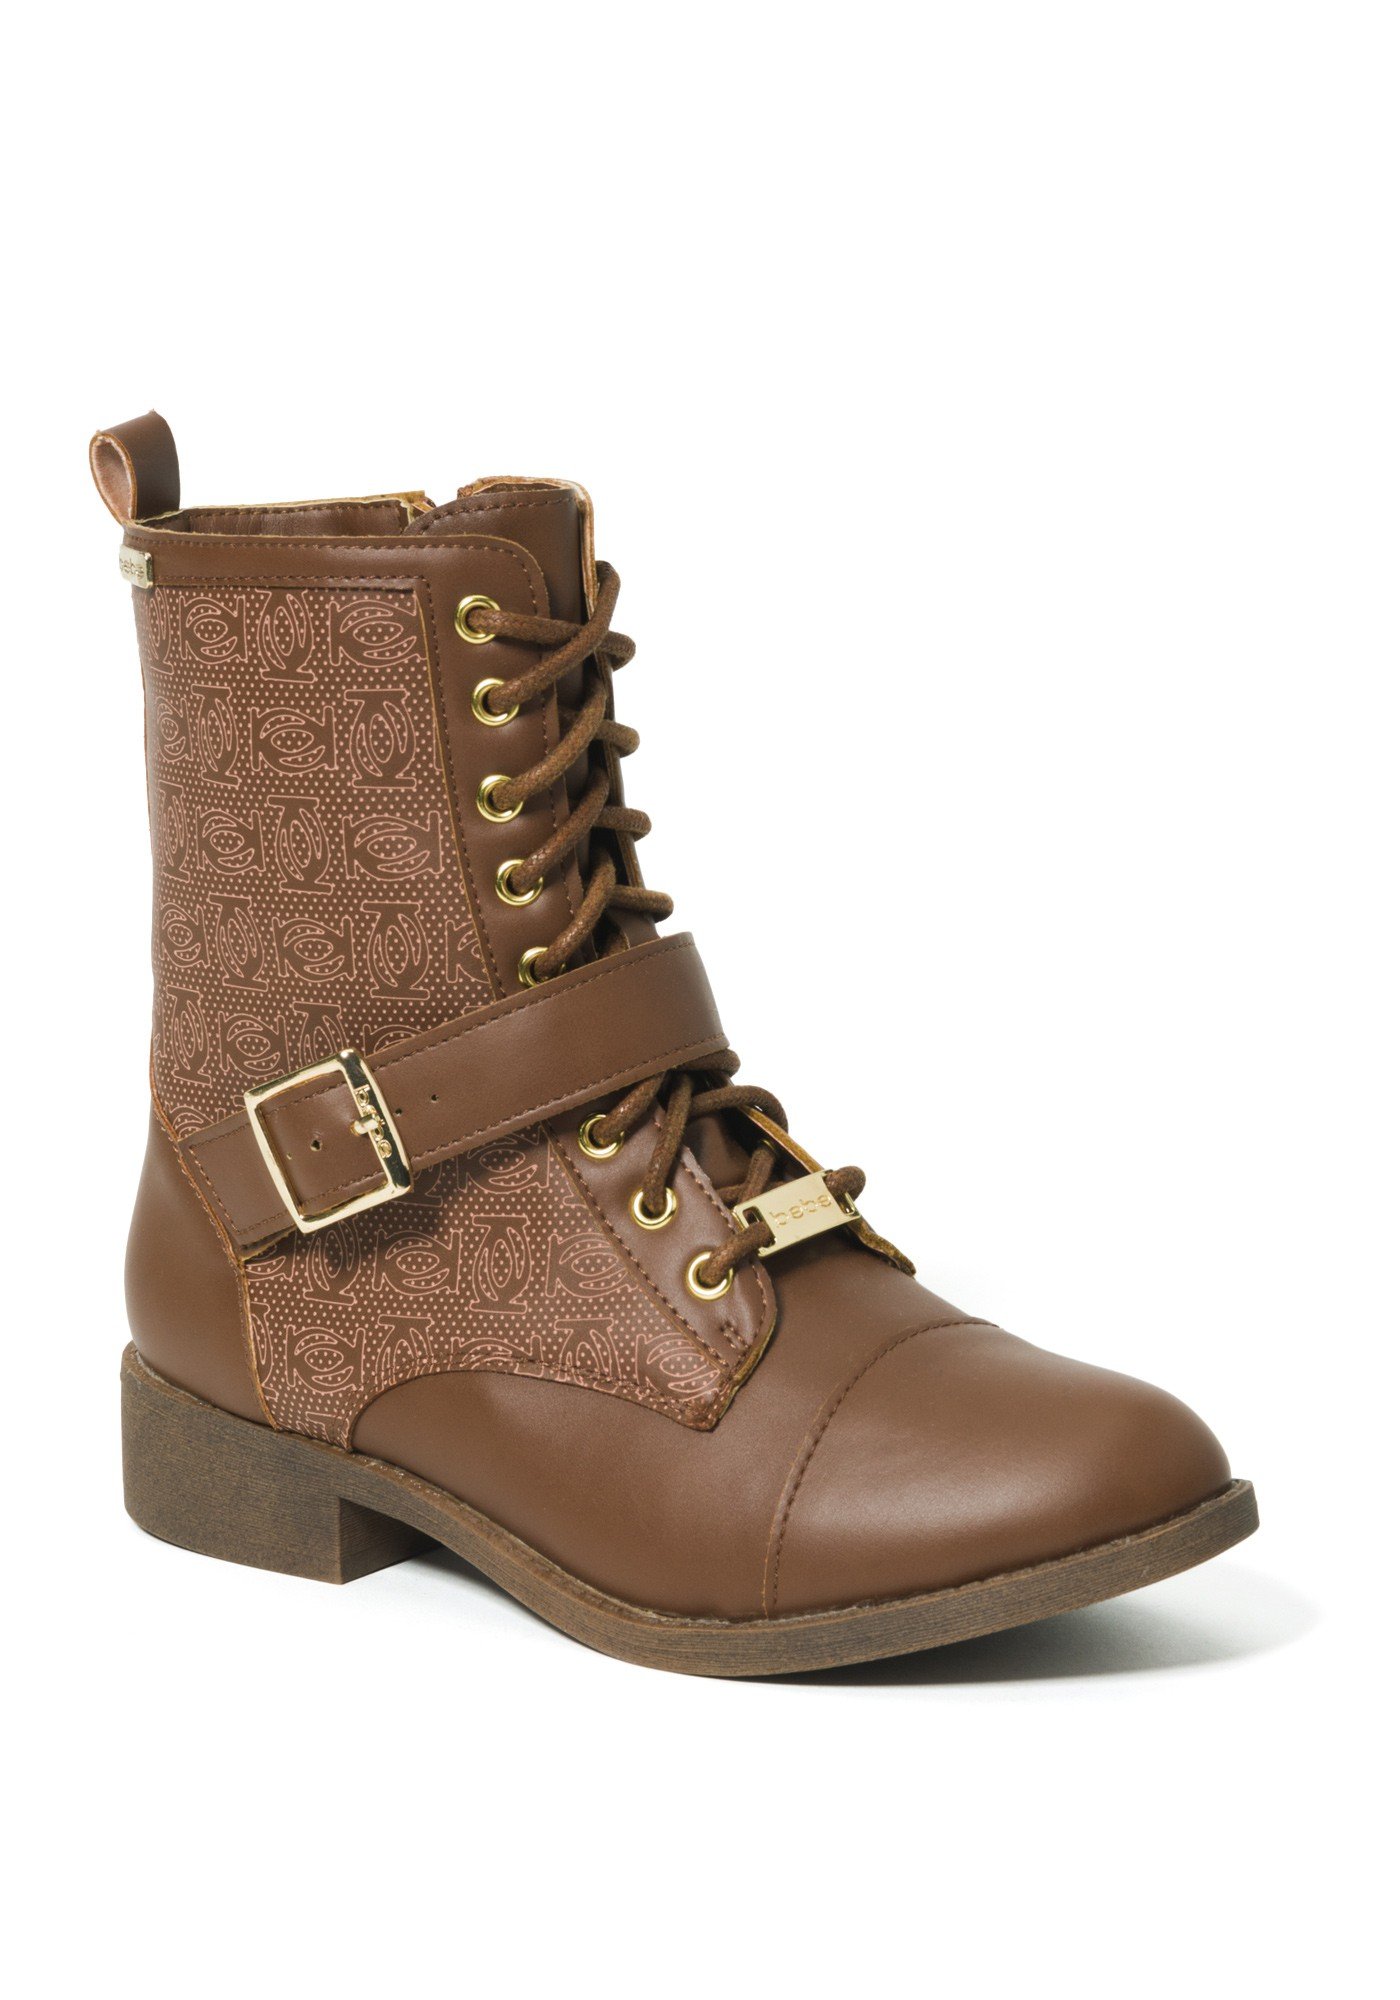 Bebe Women's Ofeibea Logo Ankle Boots, Size 7 in Cognac Synthetic